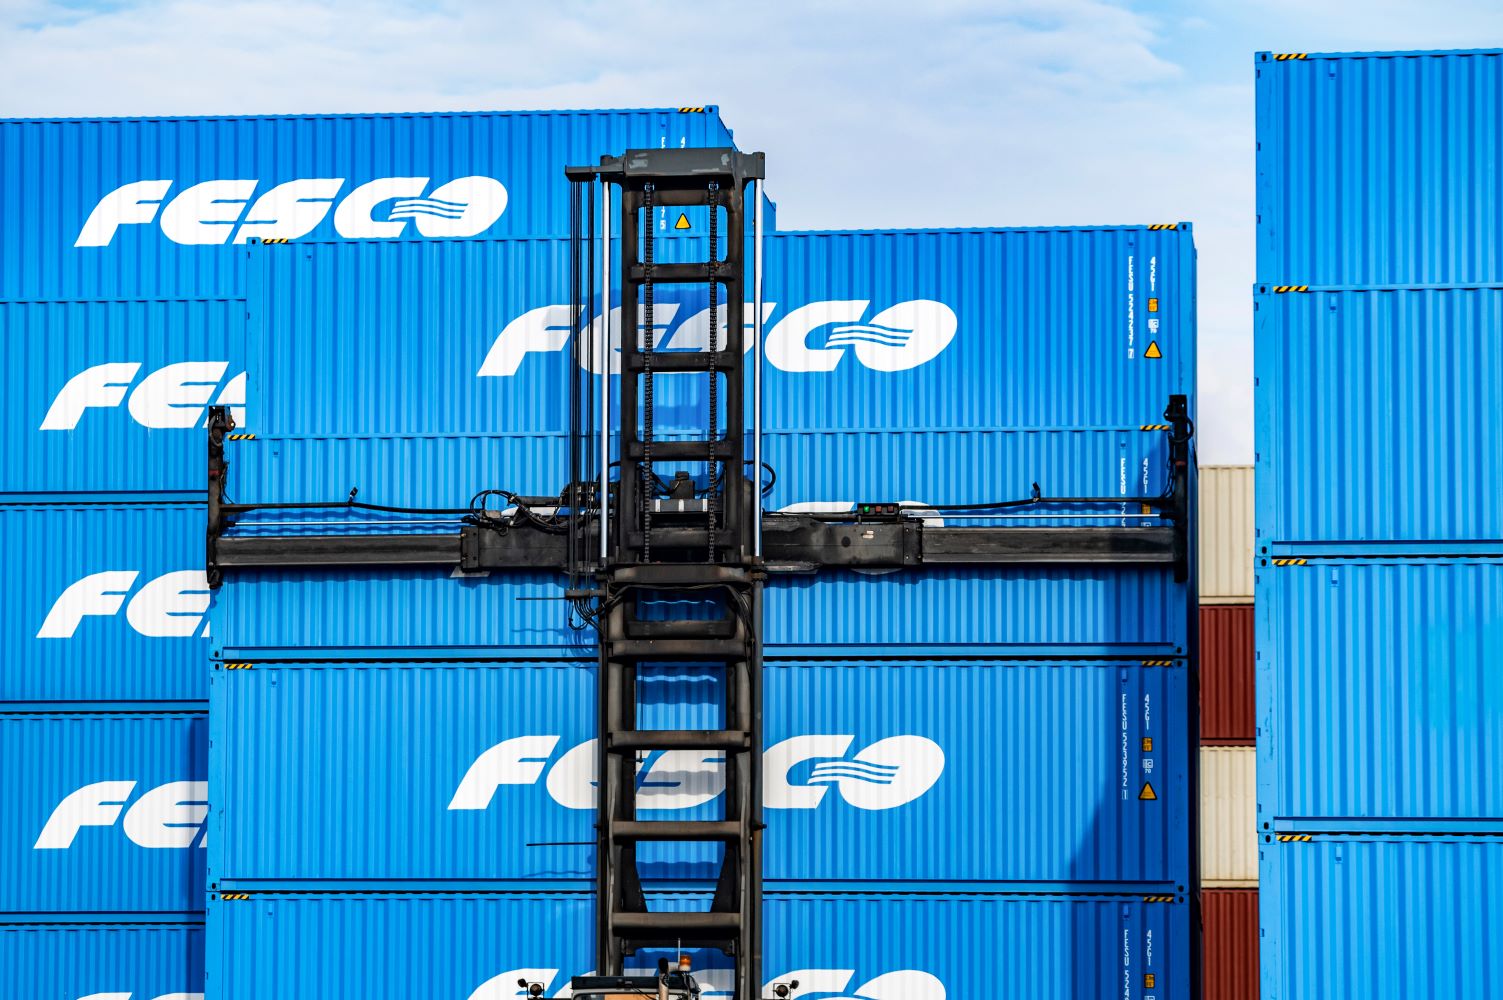 Container terminal of FESCO in Novosibirsk pumps up cargo handling by 13% in 9 months